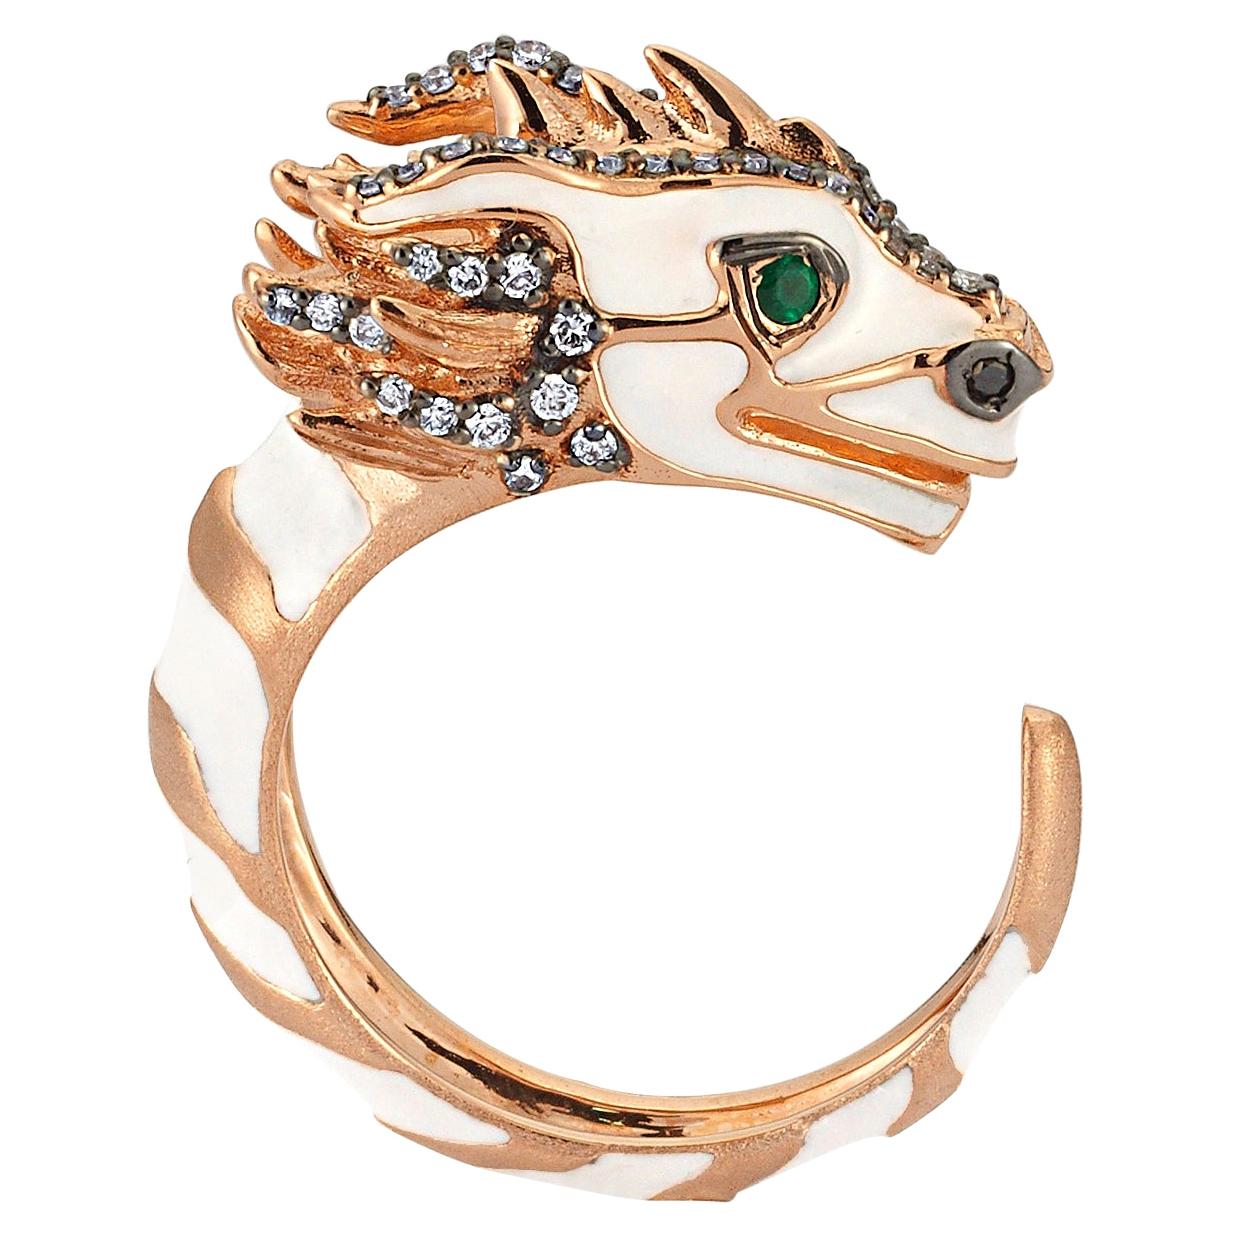 Tian Long Ring in 14k Rose Gold with Diamond and Enamel